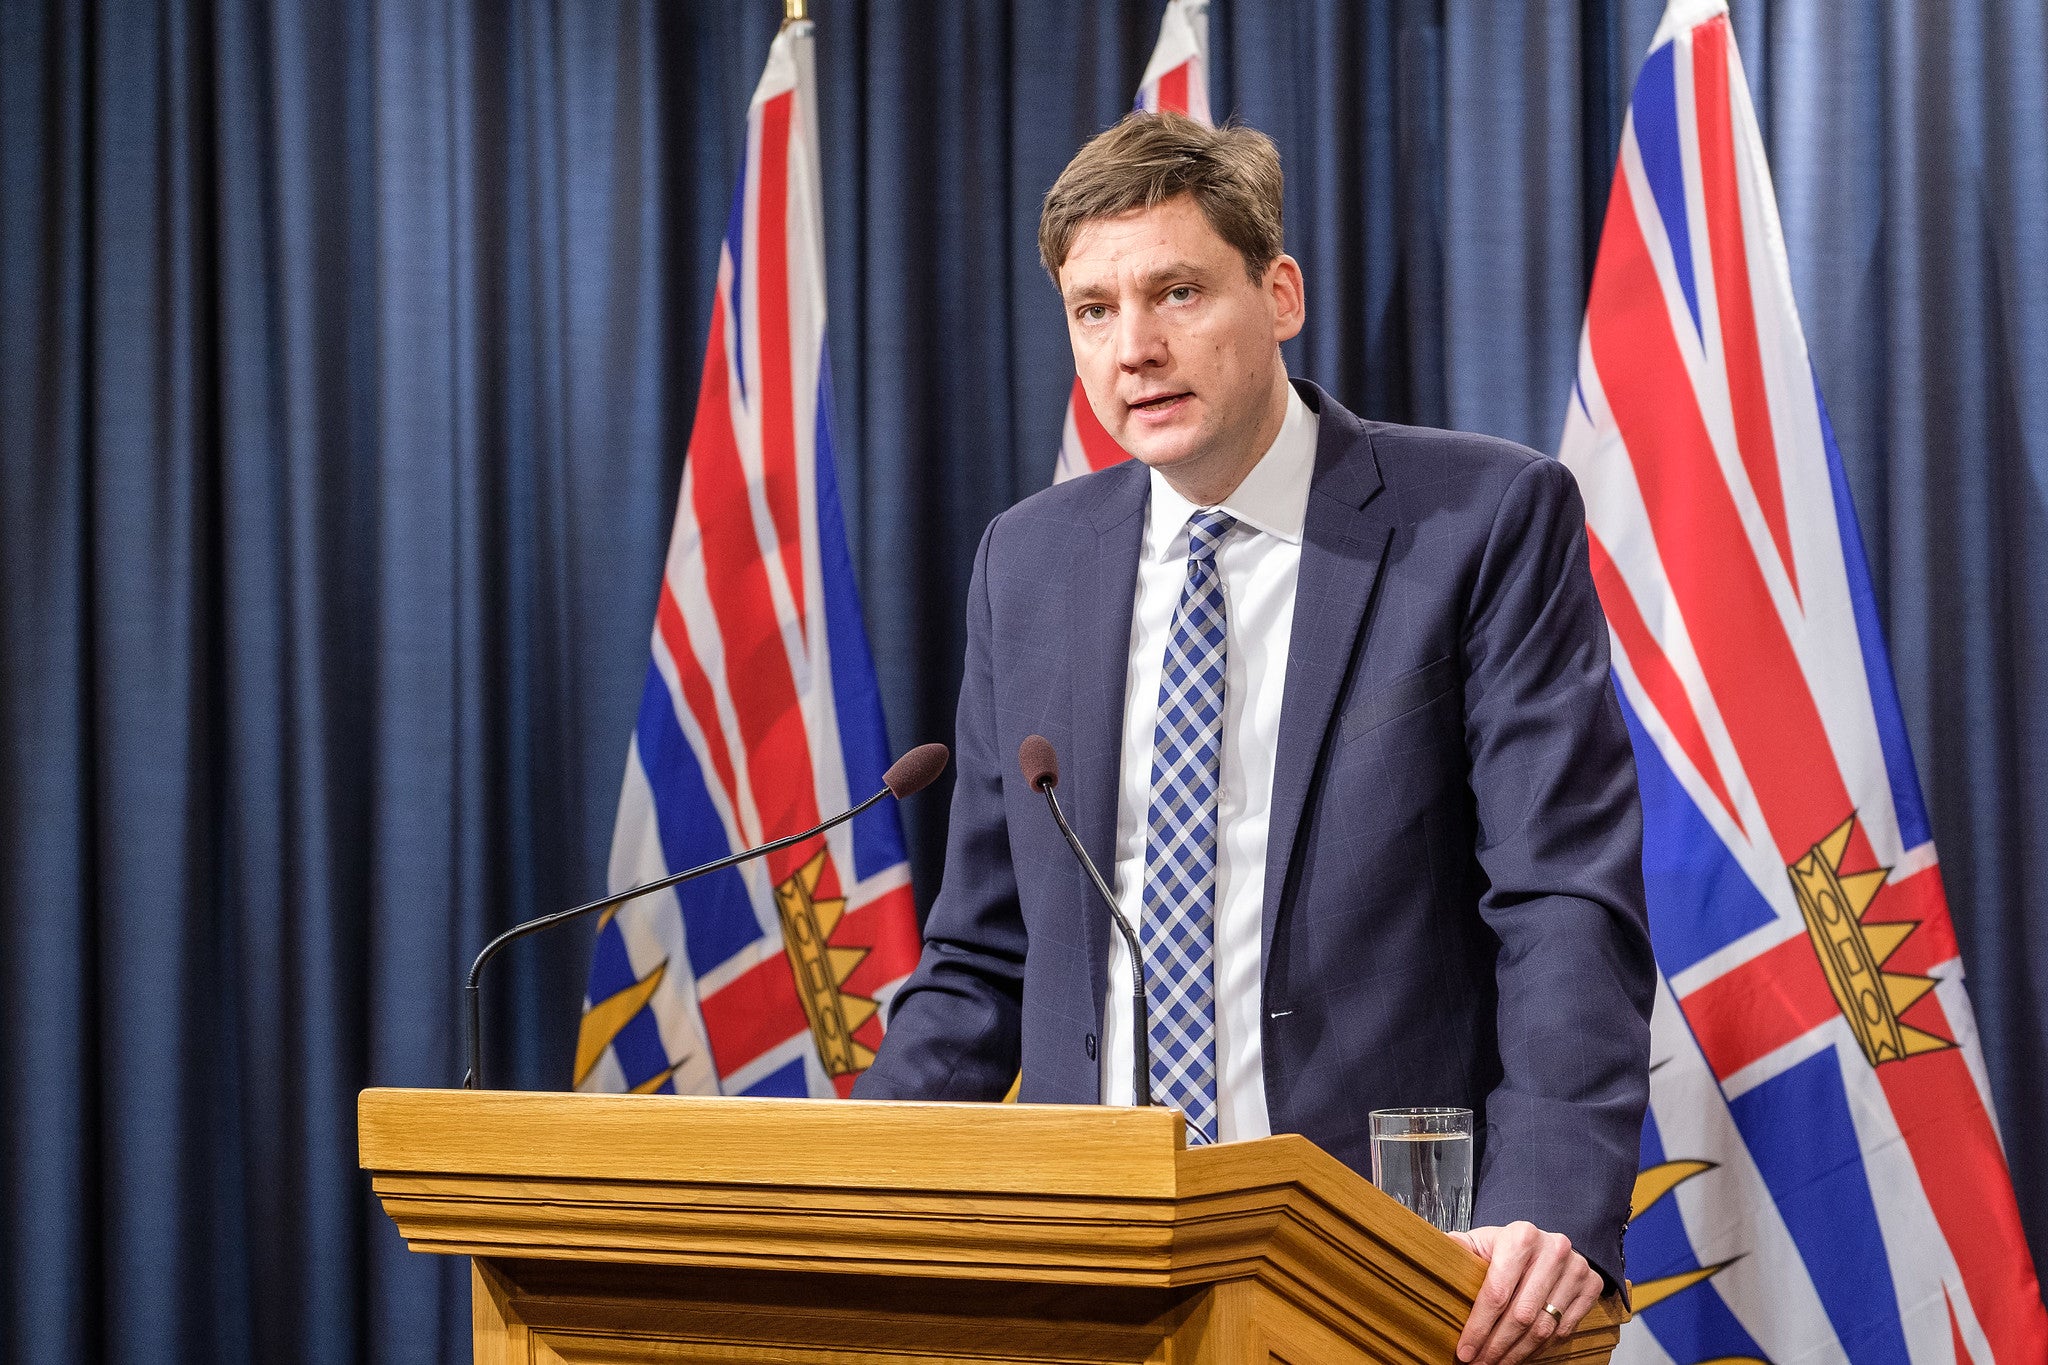 CUPE BC endorses Dave Eby to become the next leader of the BC NDP, premier | Canadian Union of Public Employees